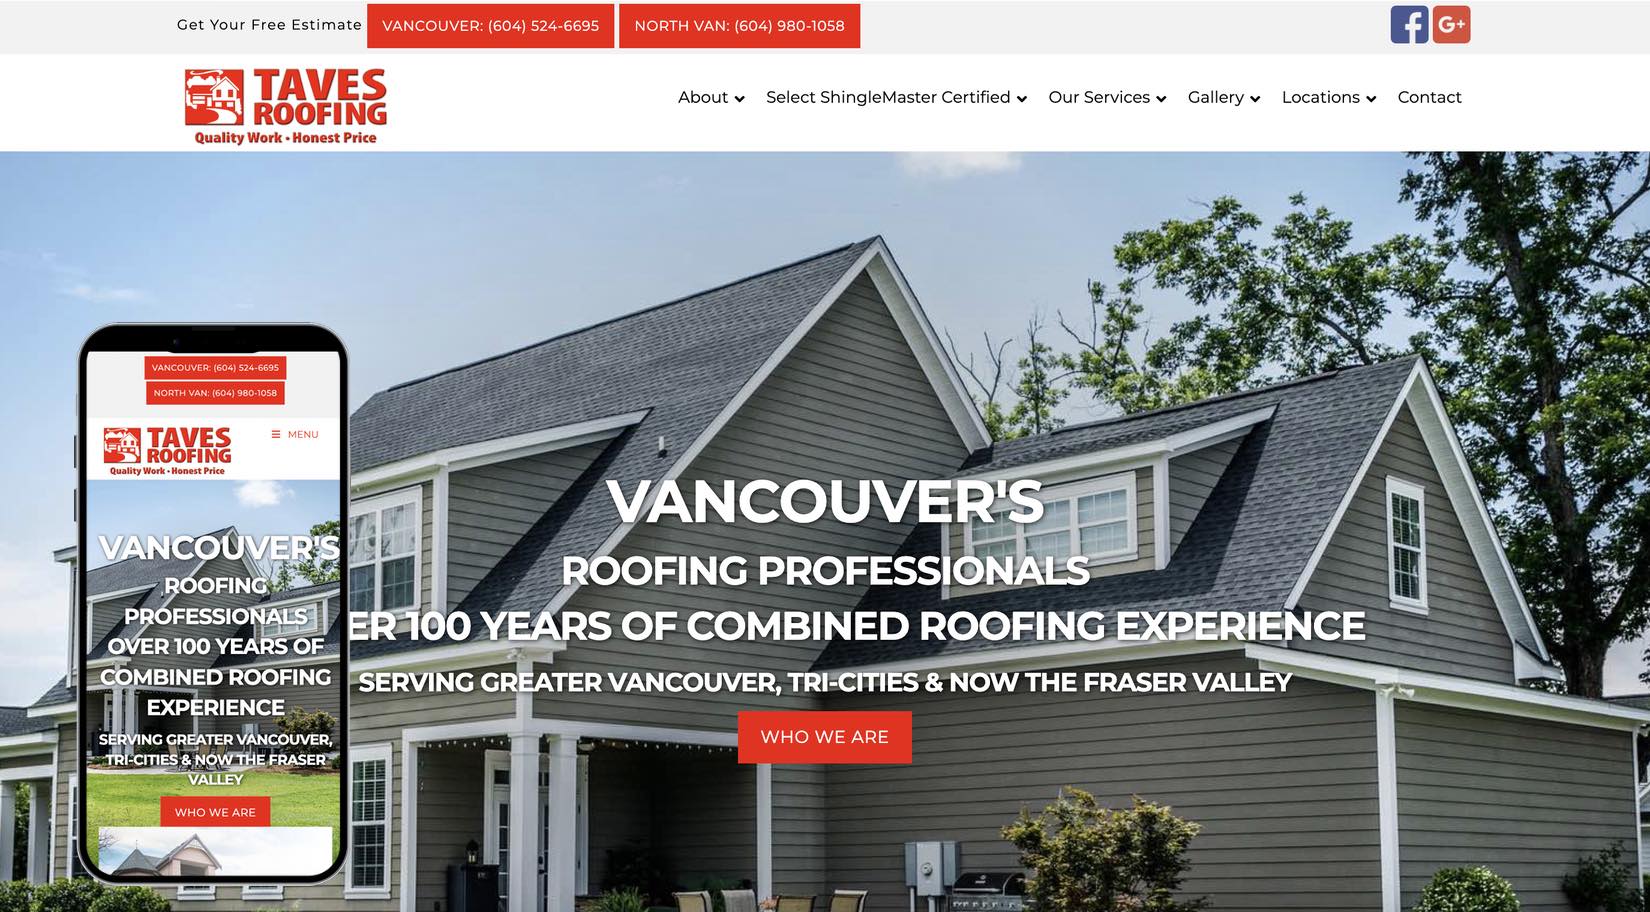 Website Design for Roofing Company